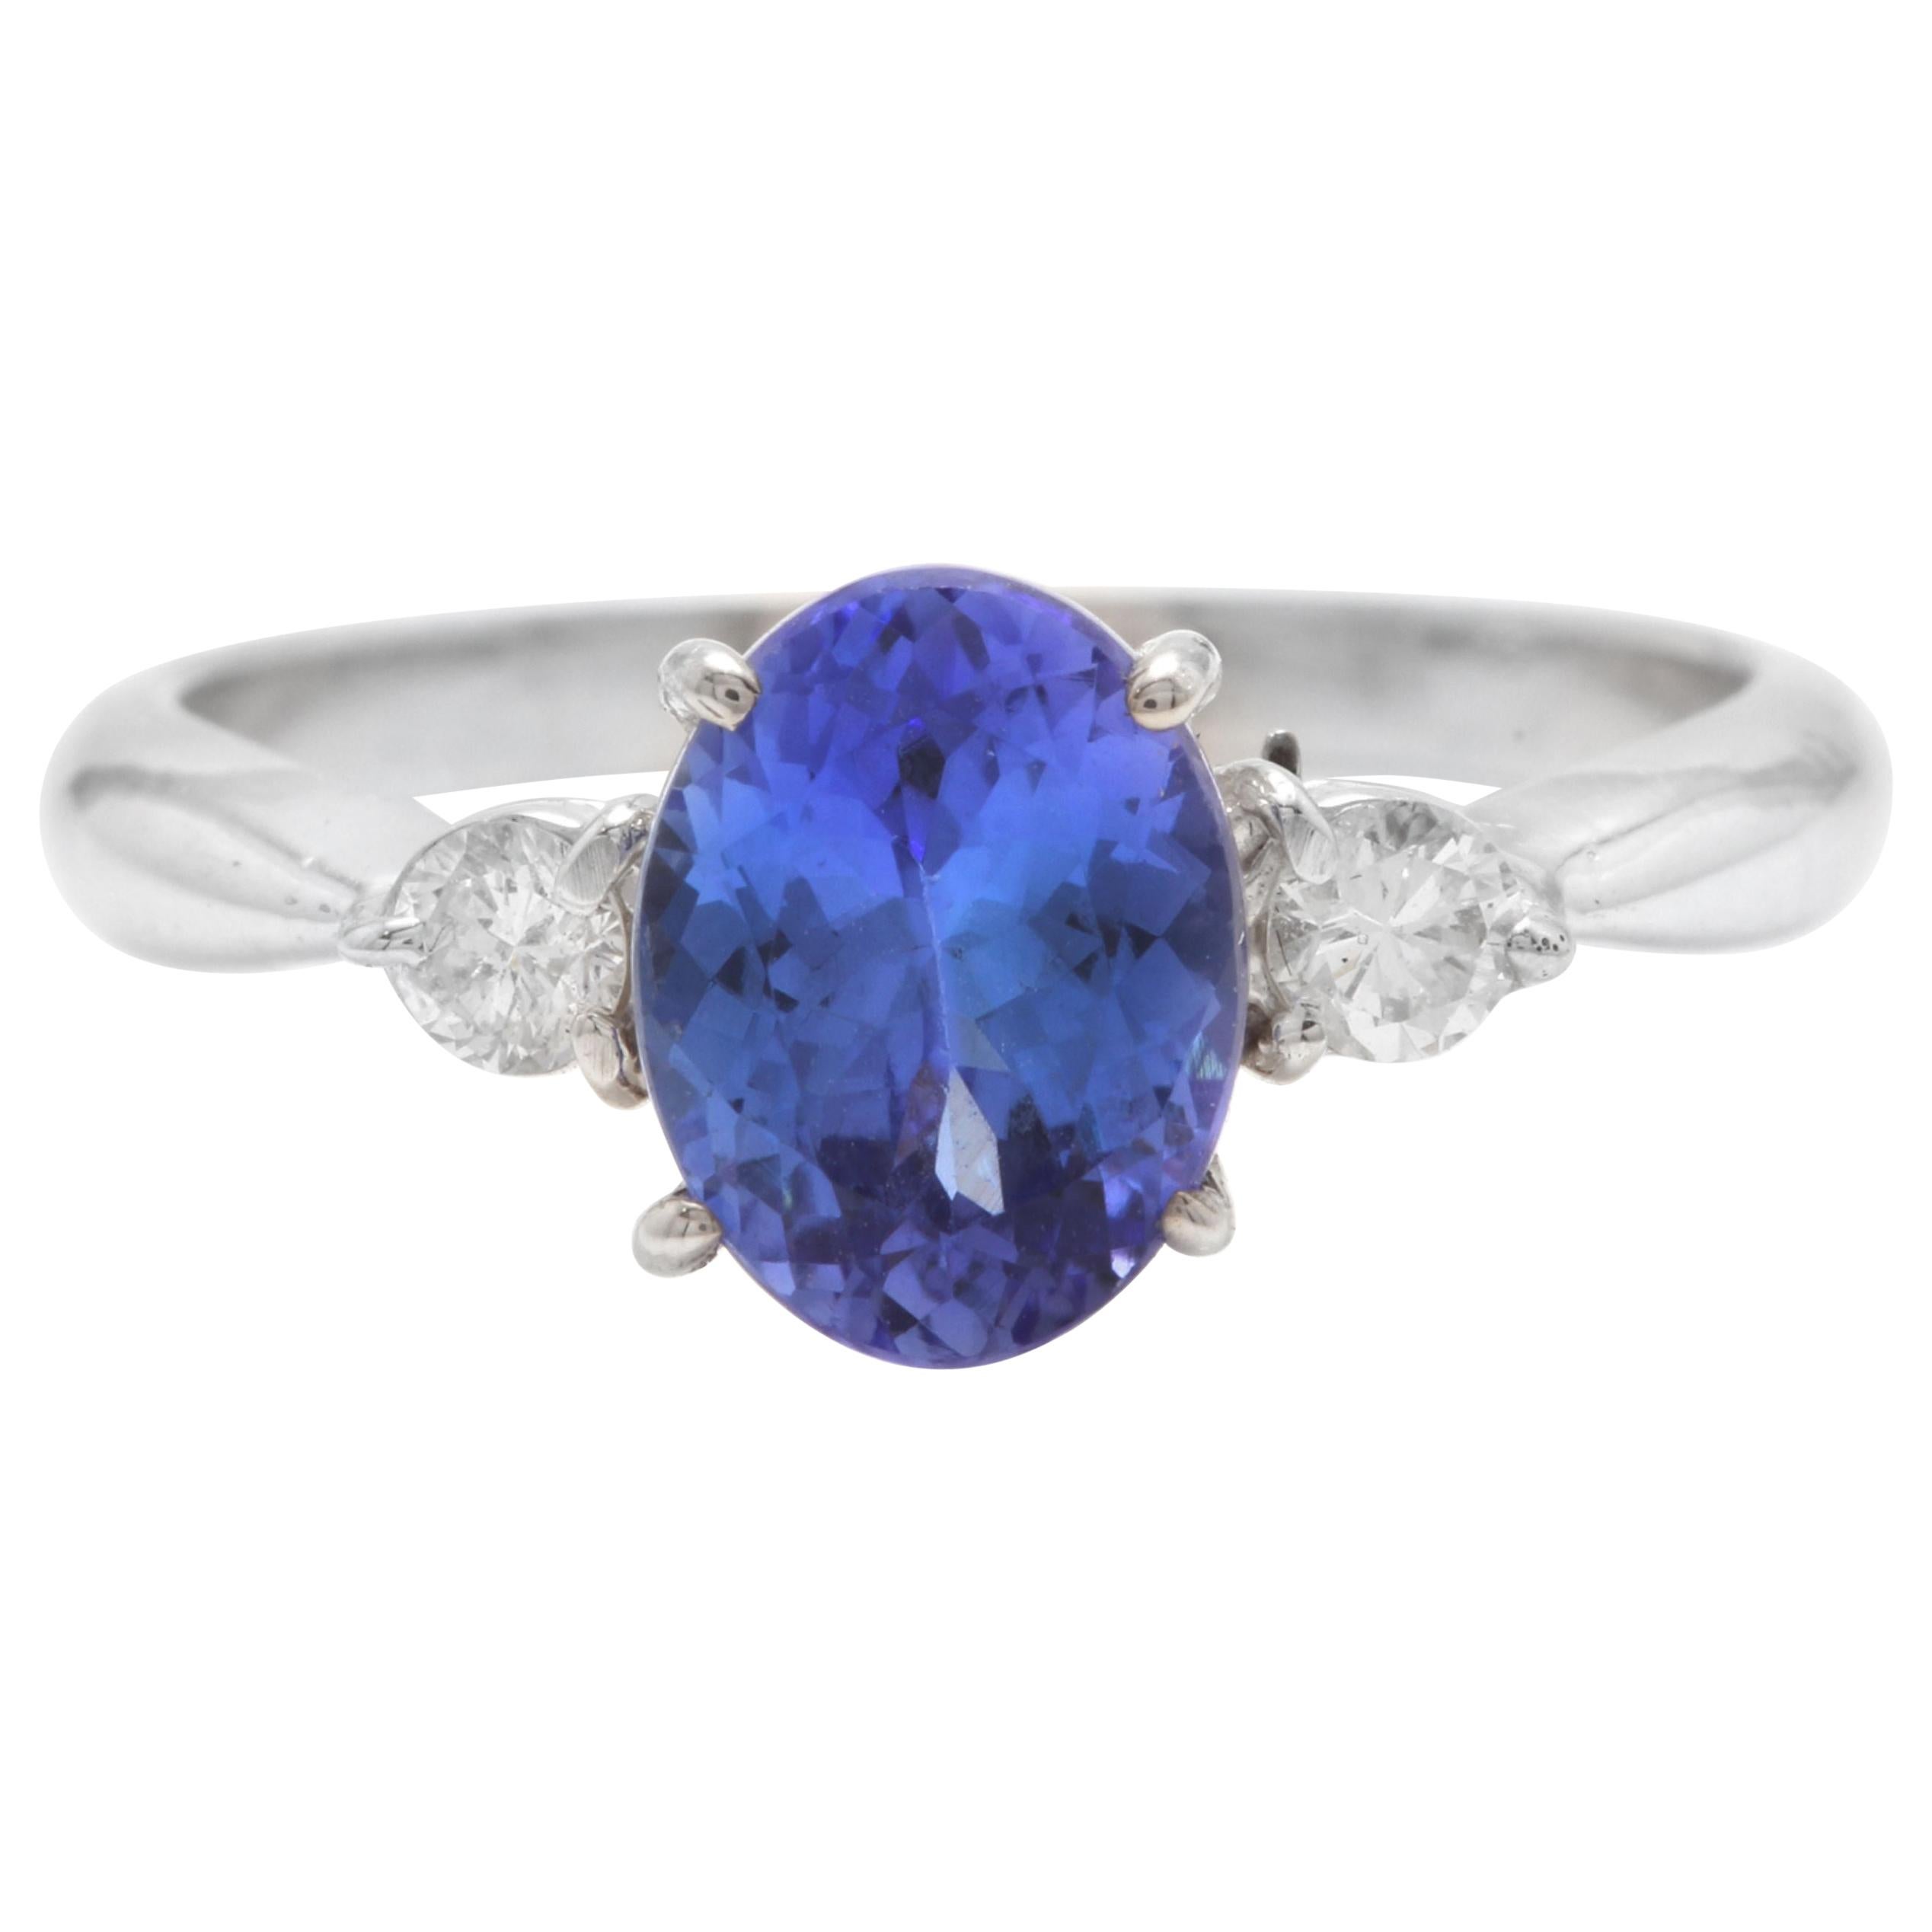 1.86 Carat Natural Very Nice Looking Tanzanite and Diamond 14K Solid White Gold